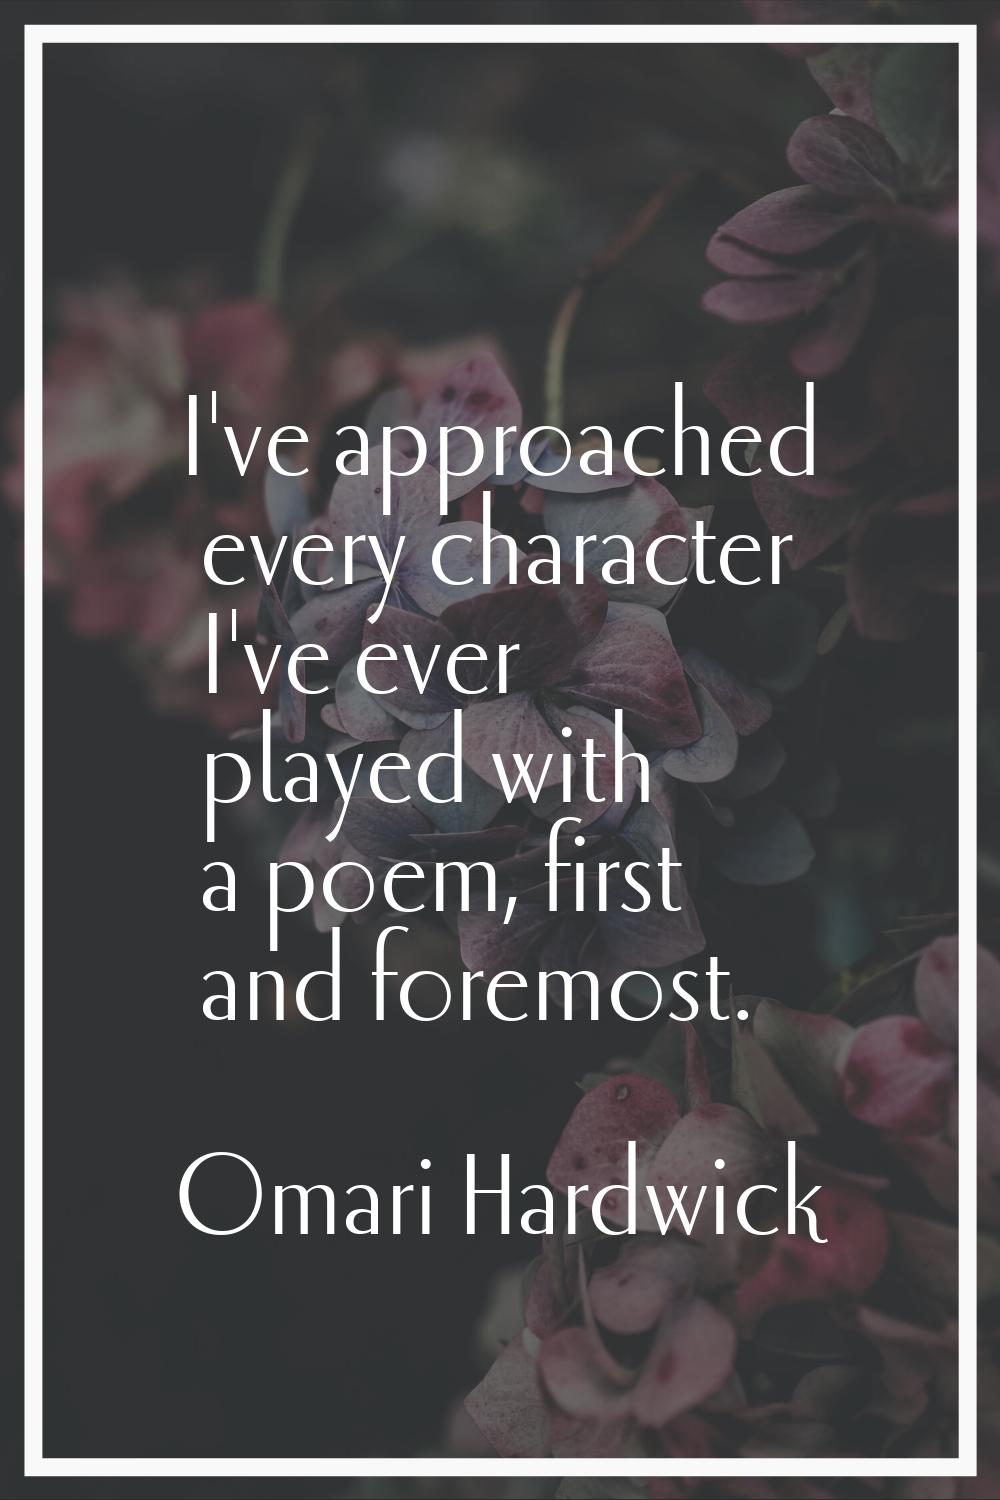 I've approached every character I've ever played with a poem, first and foremost.